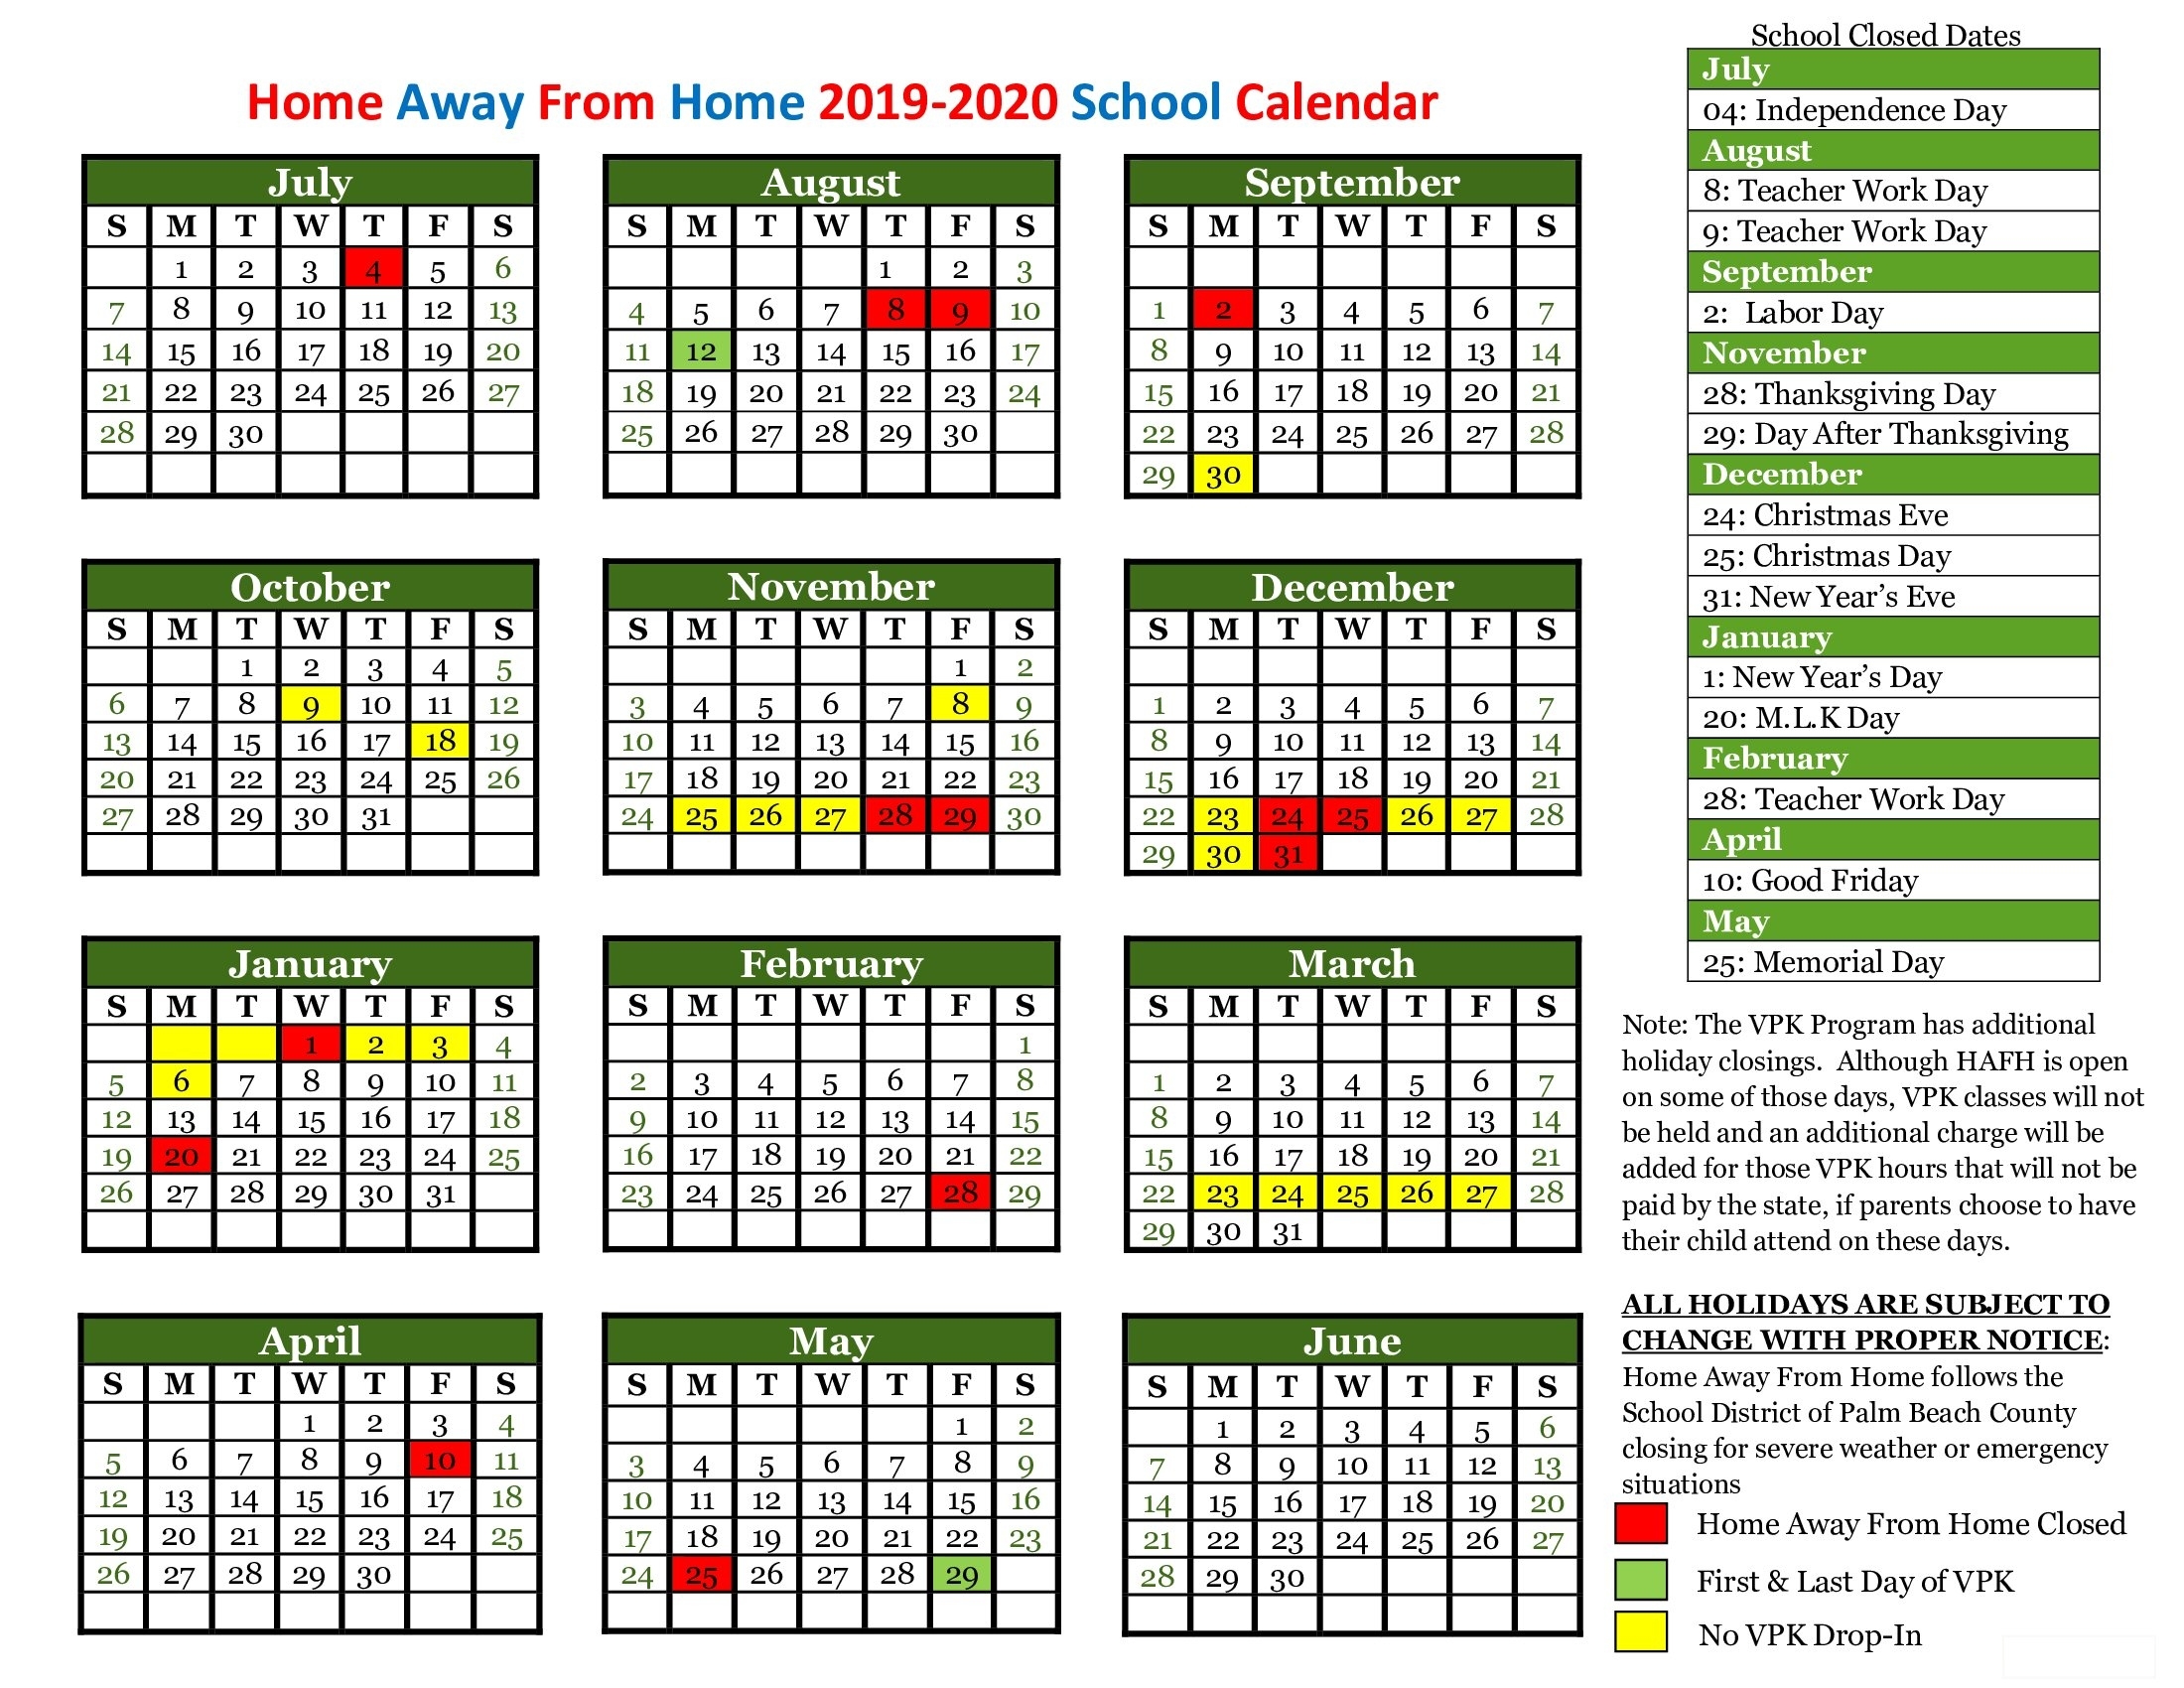 Child Care Holiday Schedule - View School Closings | Home Away From Home Dashing Calendar School West Palm Beach